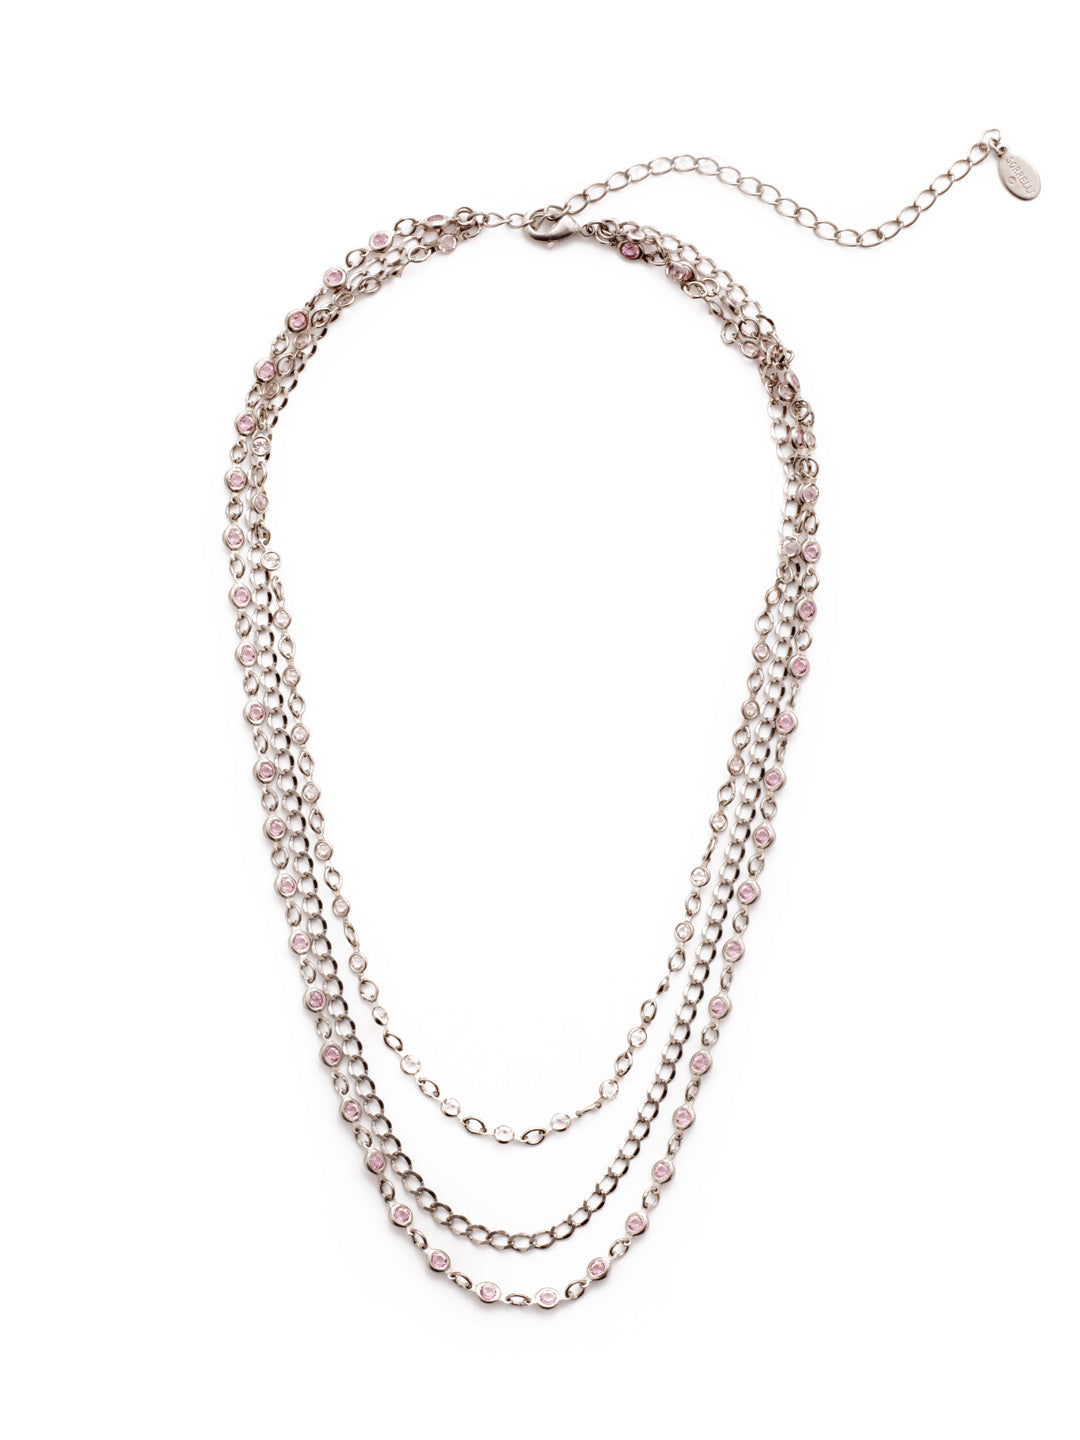 Drew Tennis Necklace - NEP91ASPNK - <p>In need of some layering? The Drew Tennis Necklace is just wat you need, with 3 strands of beautiful crystals. From Sorrelli's Petal Pink collection in our Antique Silver-tone finish.</p>